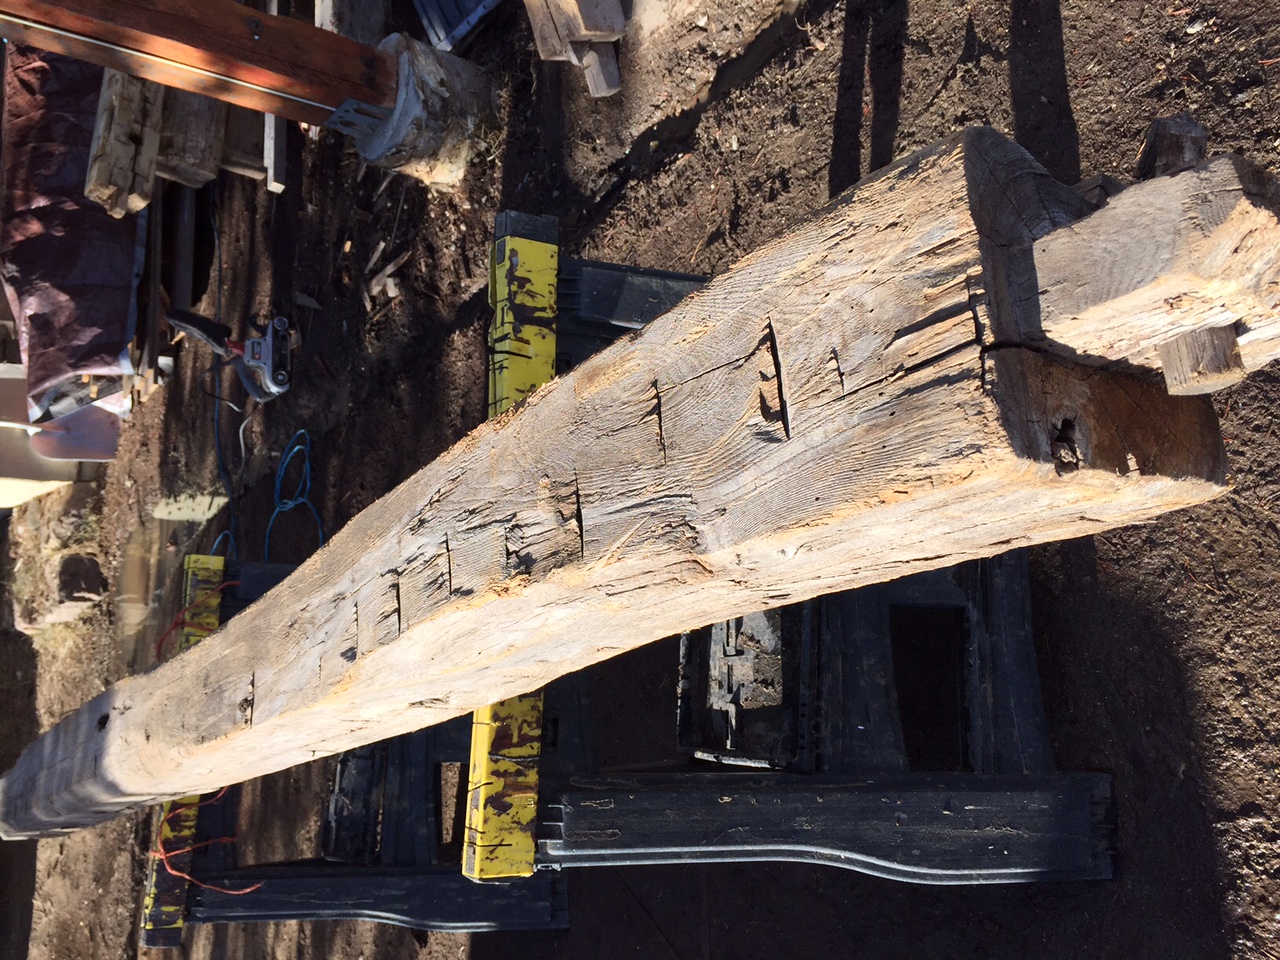 Reclaimed wood products, hand-hewn beam